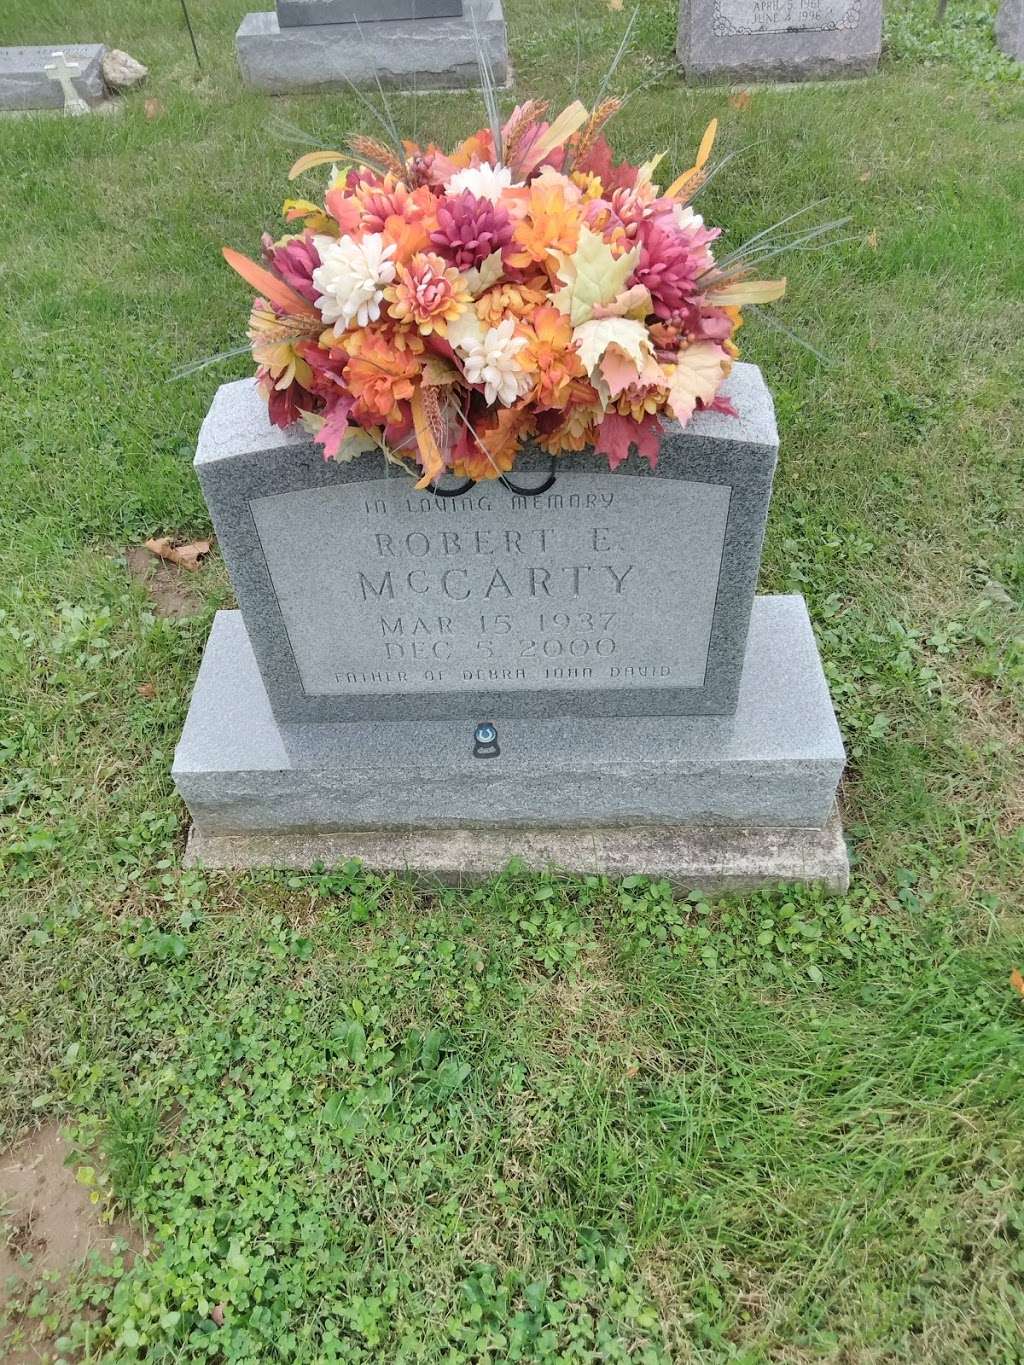 Gravel Lawn Cemetery | 9088 1025 South, Fortville, IN 46040 | Phone: (317) 485-5987